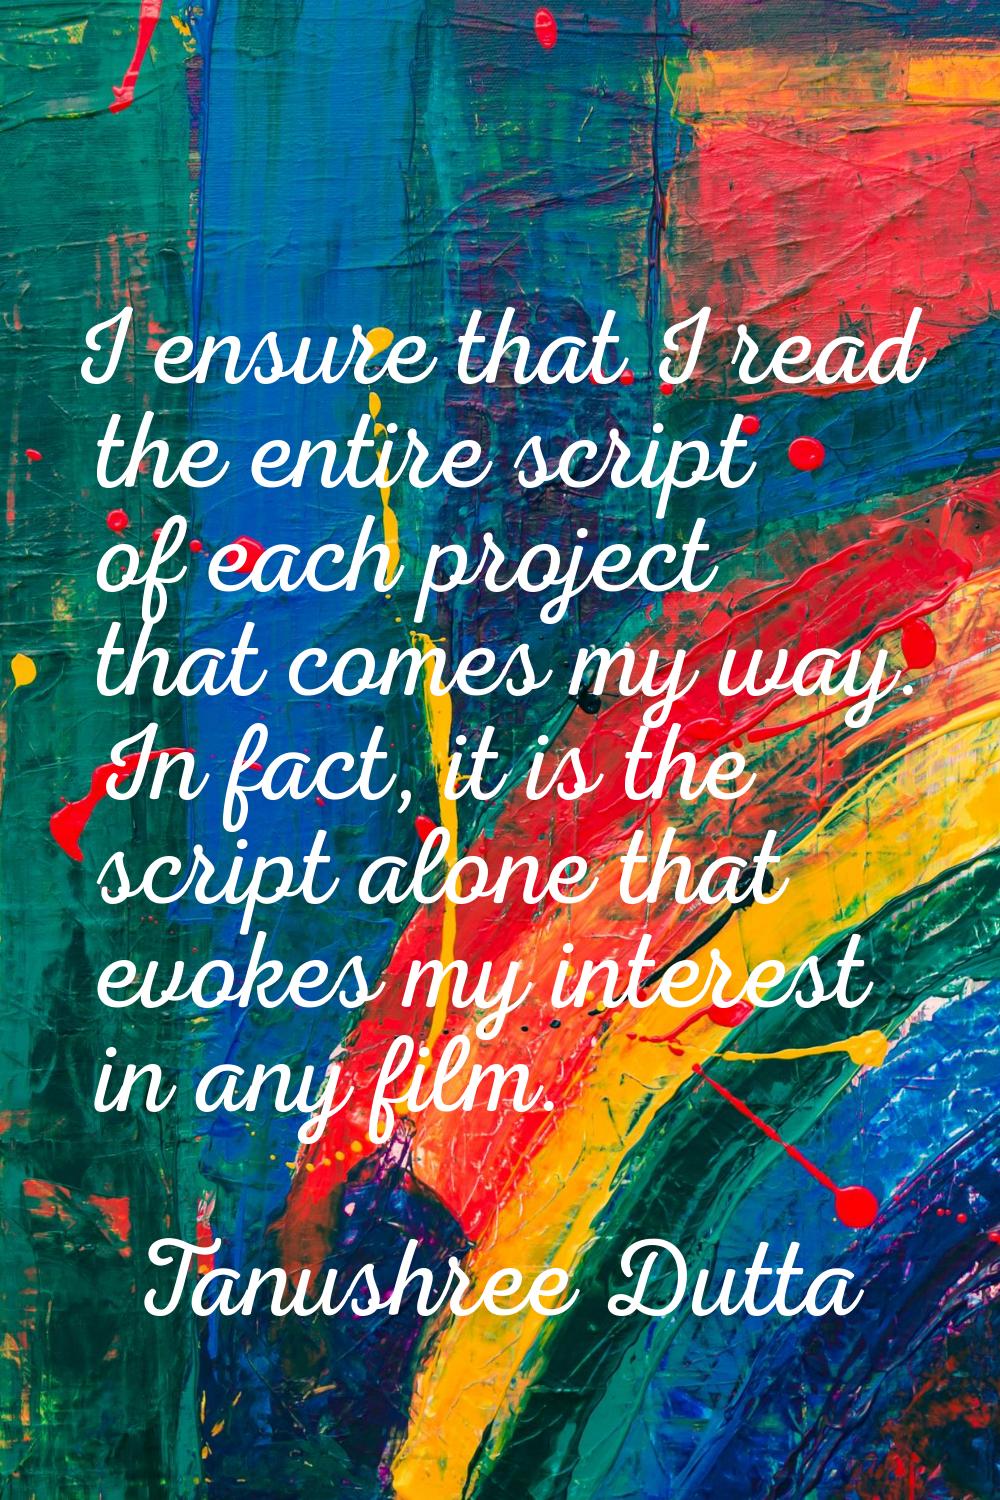 I ensure that I read the entire script of each project that comes my way. In fact, it is the script